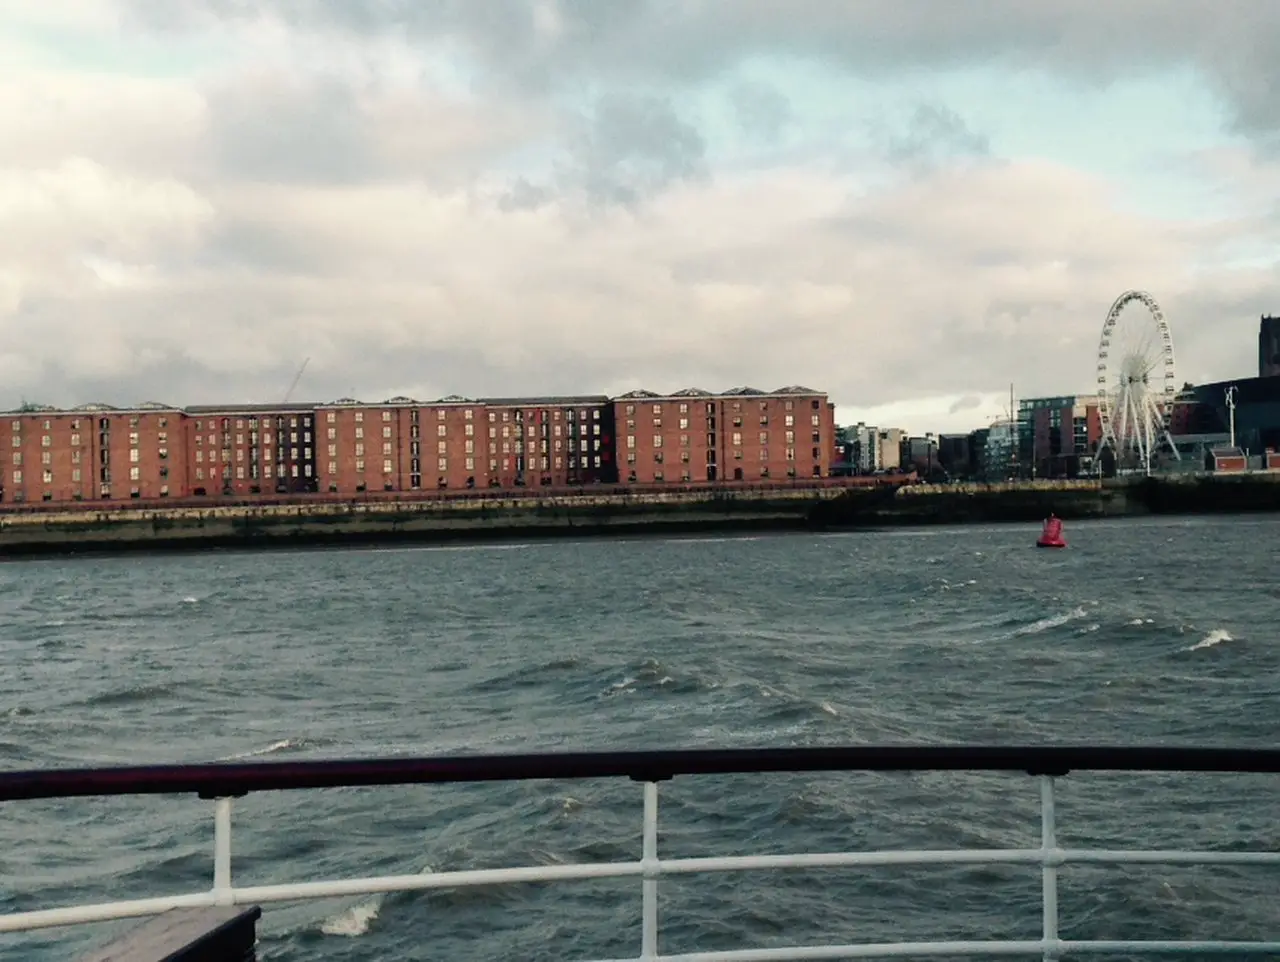 Photo taken from a Mersey River Ferry ride I took in January, with choppy waters and cloudy skies. The Albert Dock and Liverpool Wheel are in the distance. Cold winter weather is one of the reasons you may think Liverpool is not worth visiting.